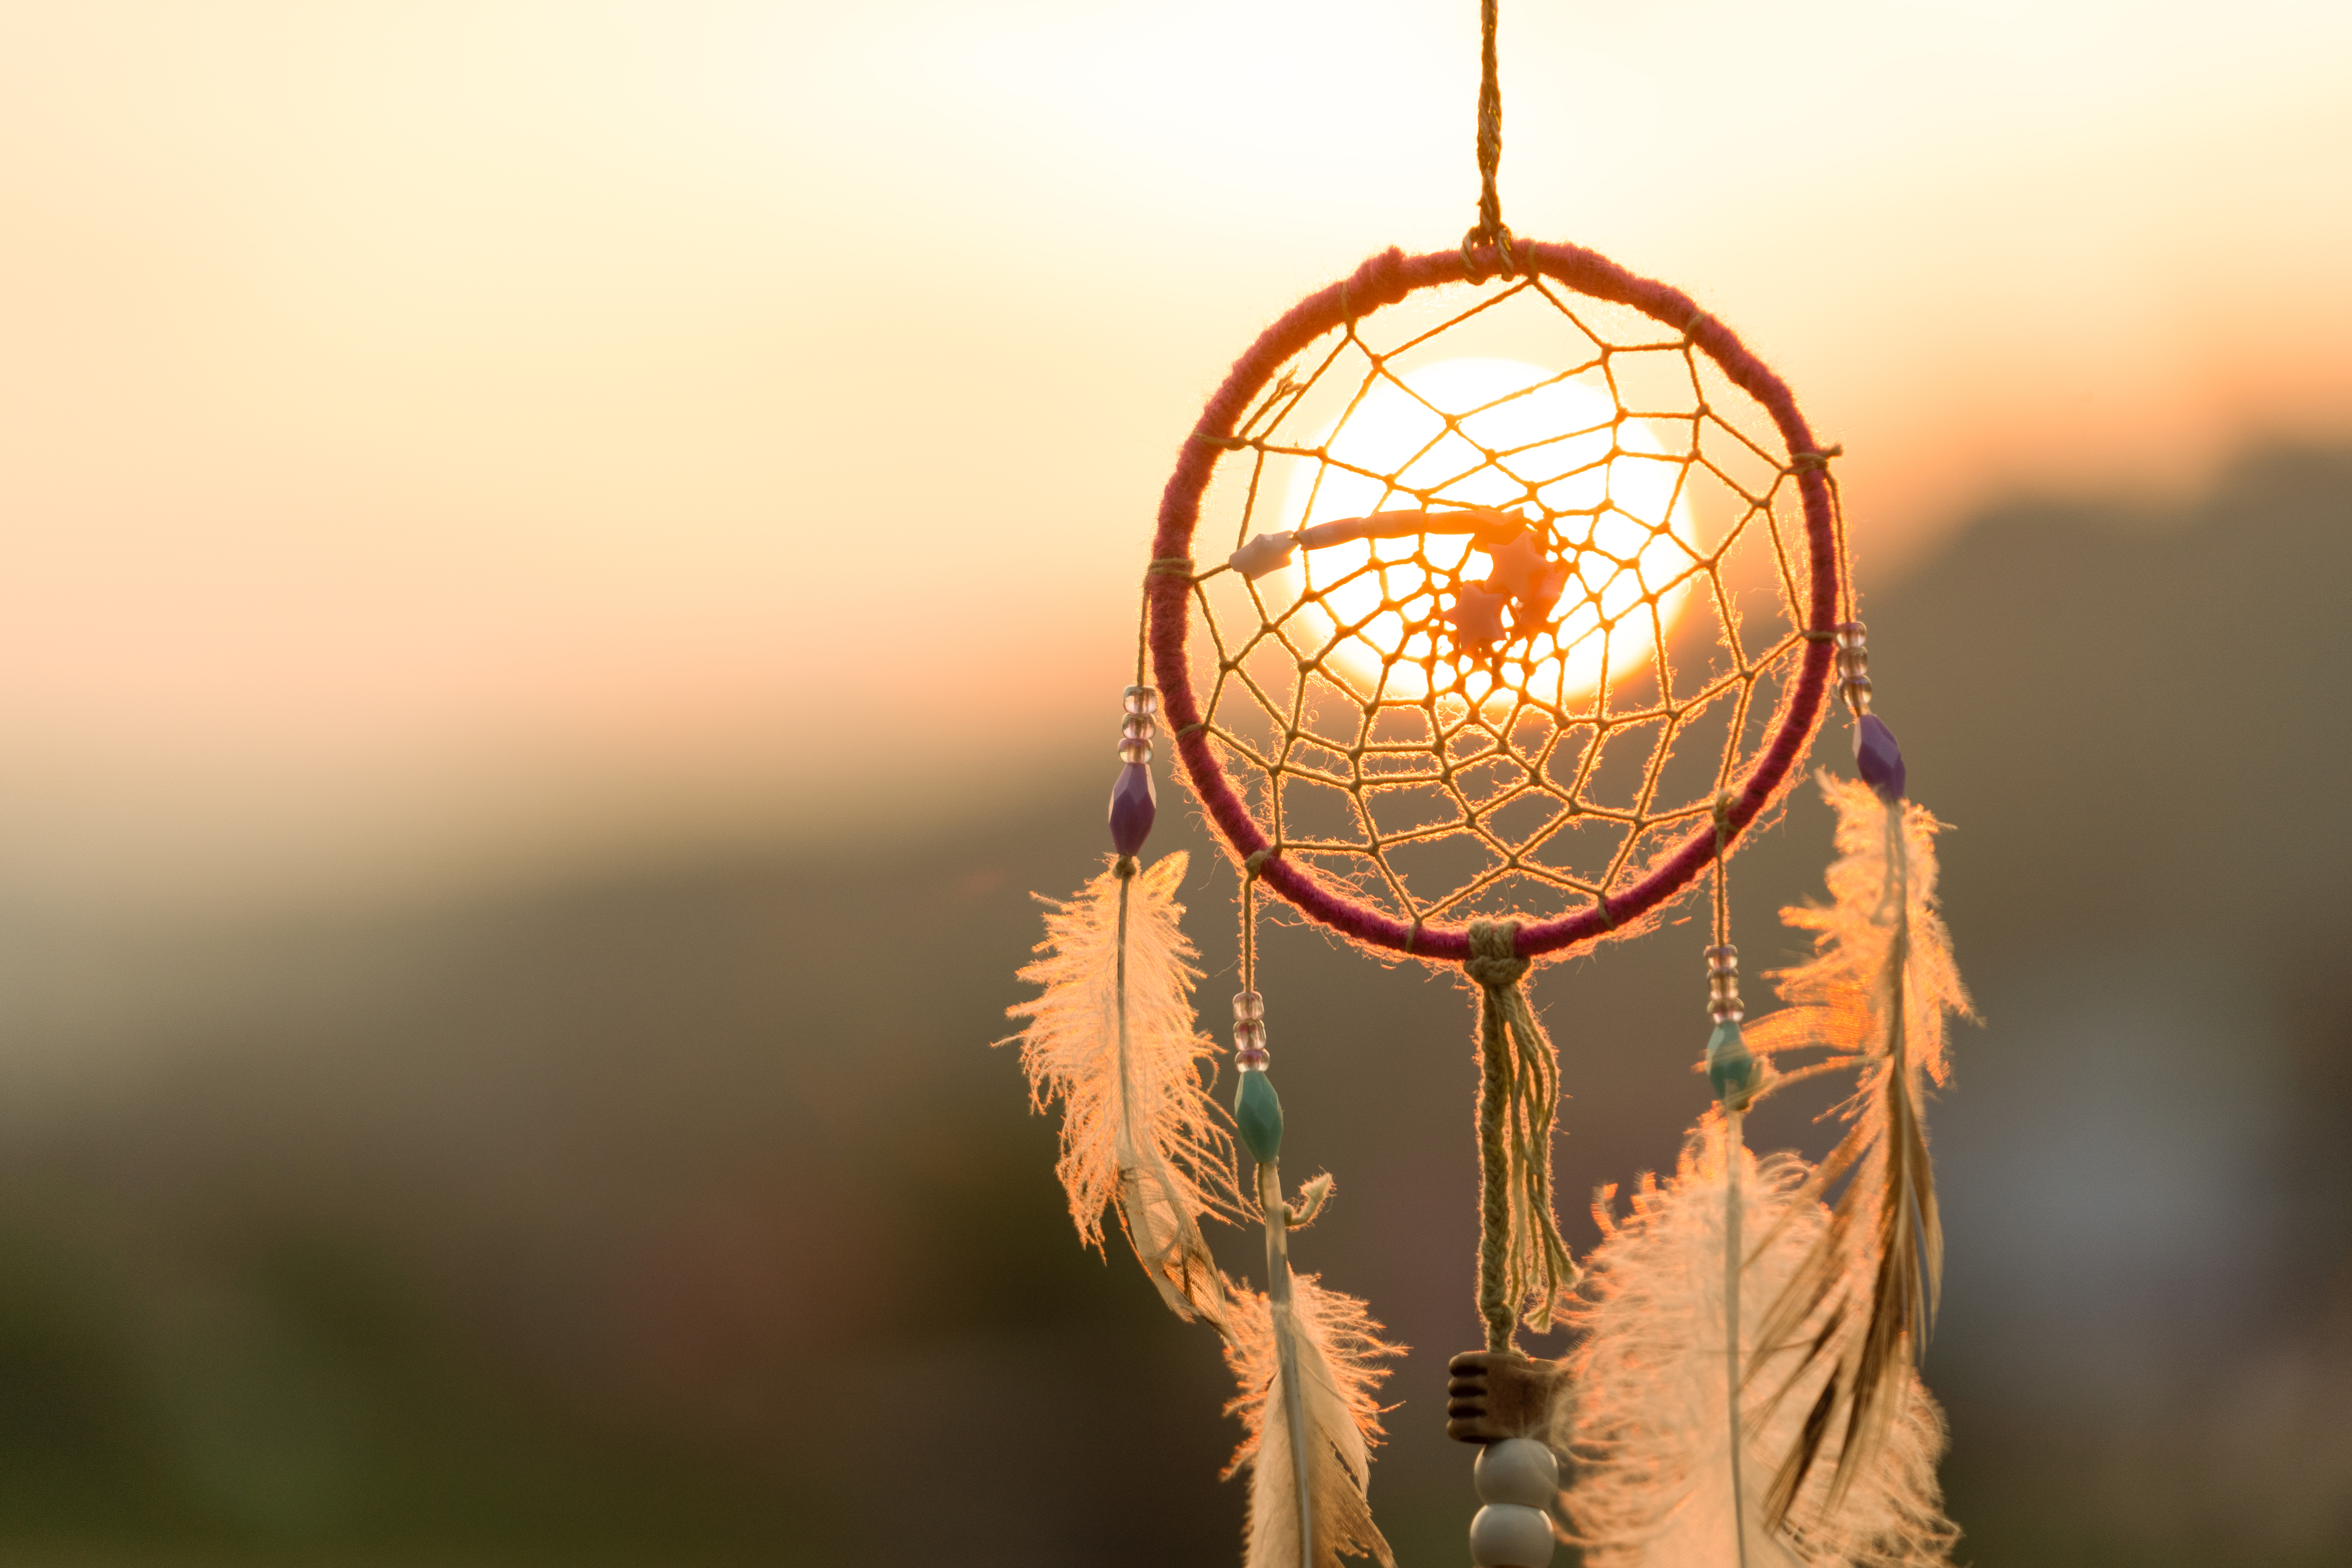 A dreamcatcher in the sun | Source: Getty Images